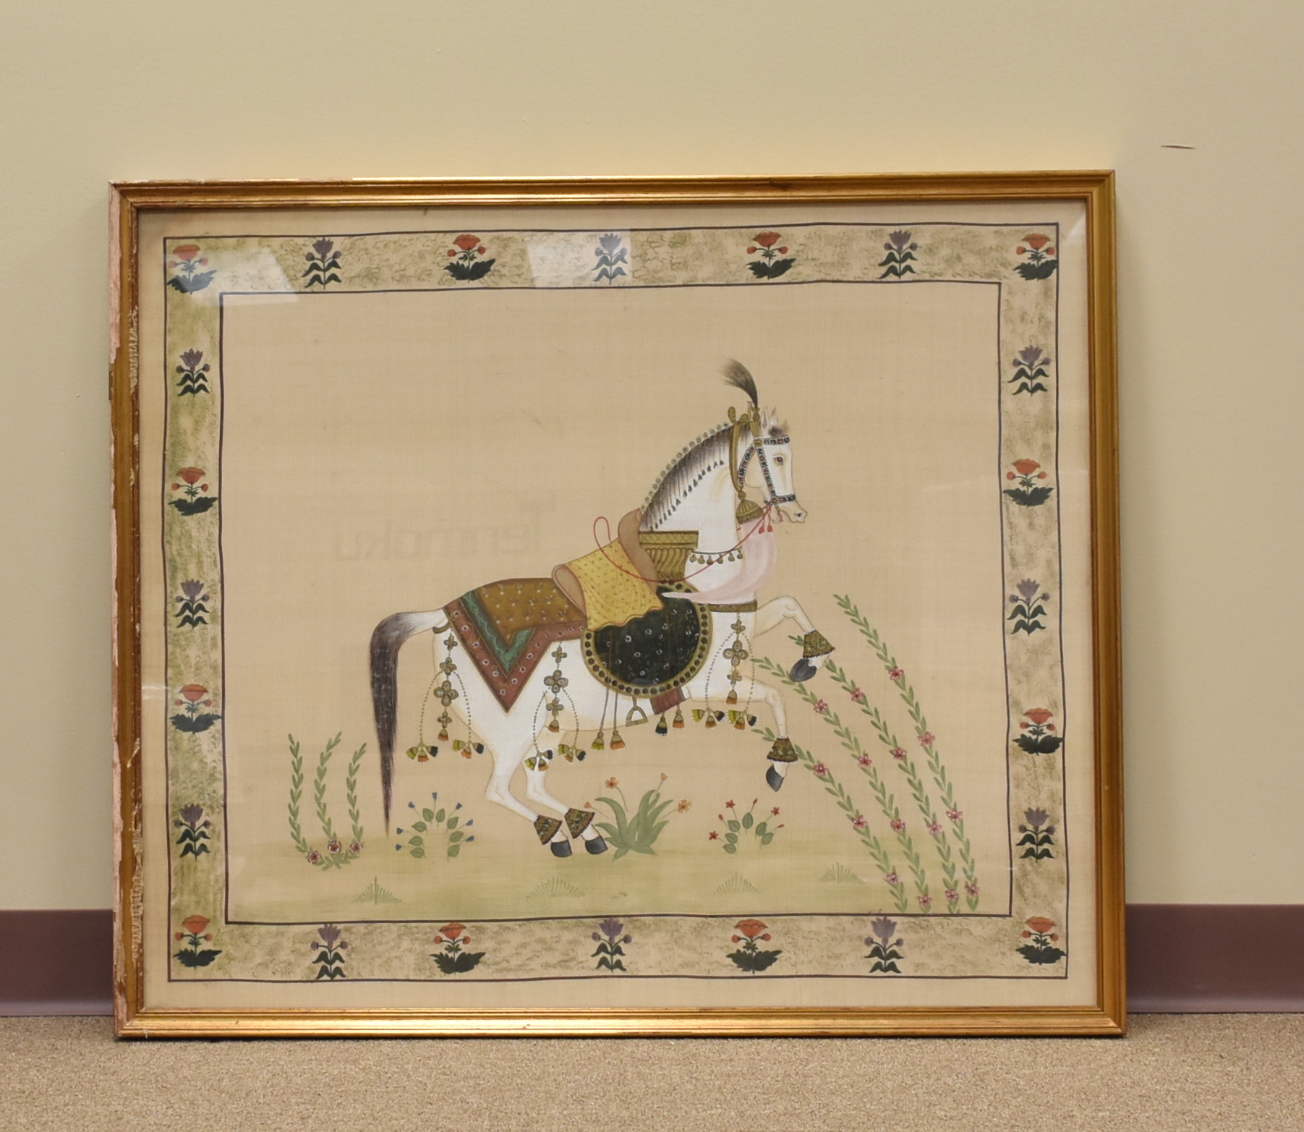 FRAMED PAINTING ON SILK WITH HORSE 3b6293